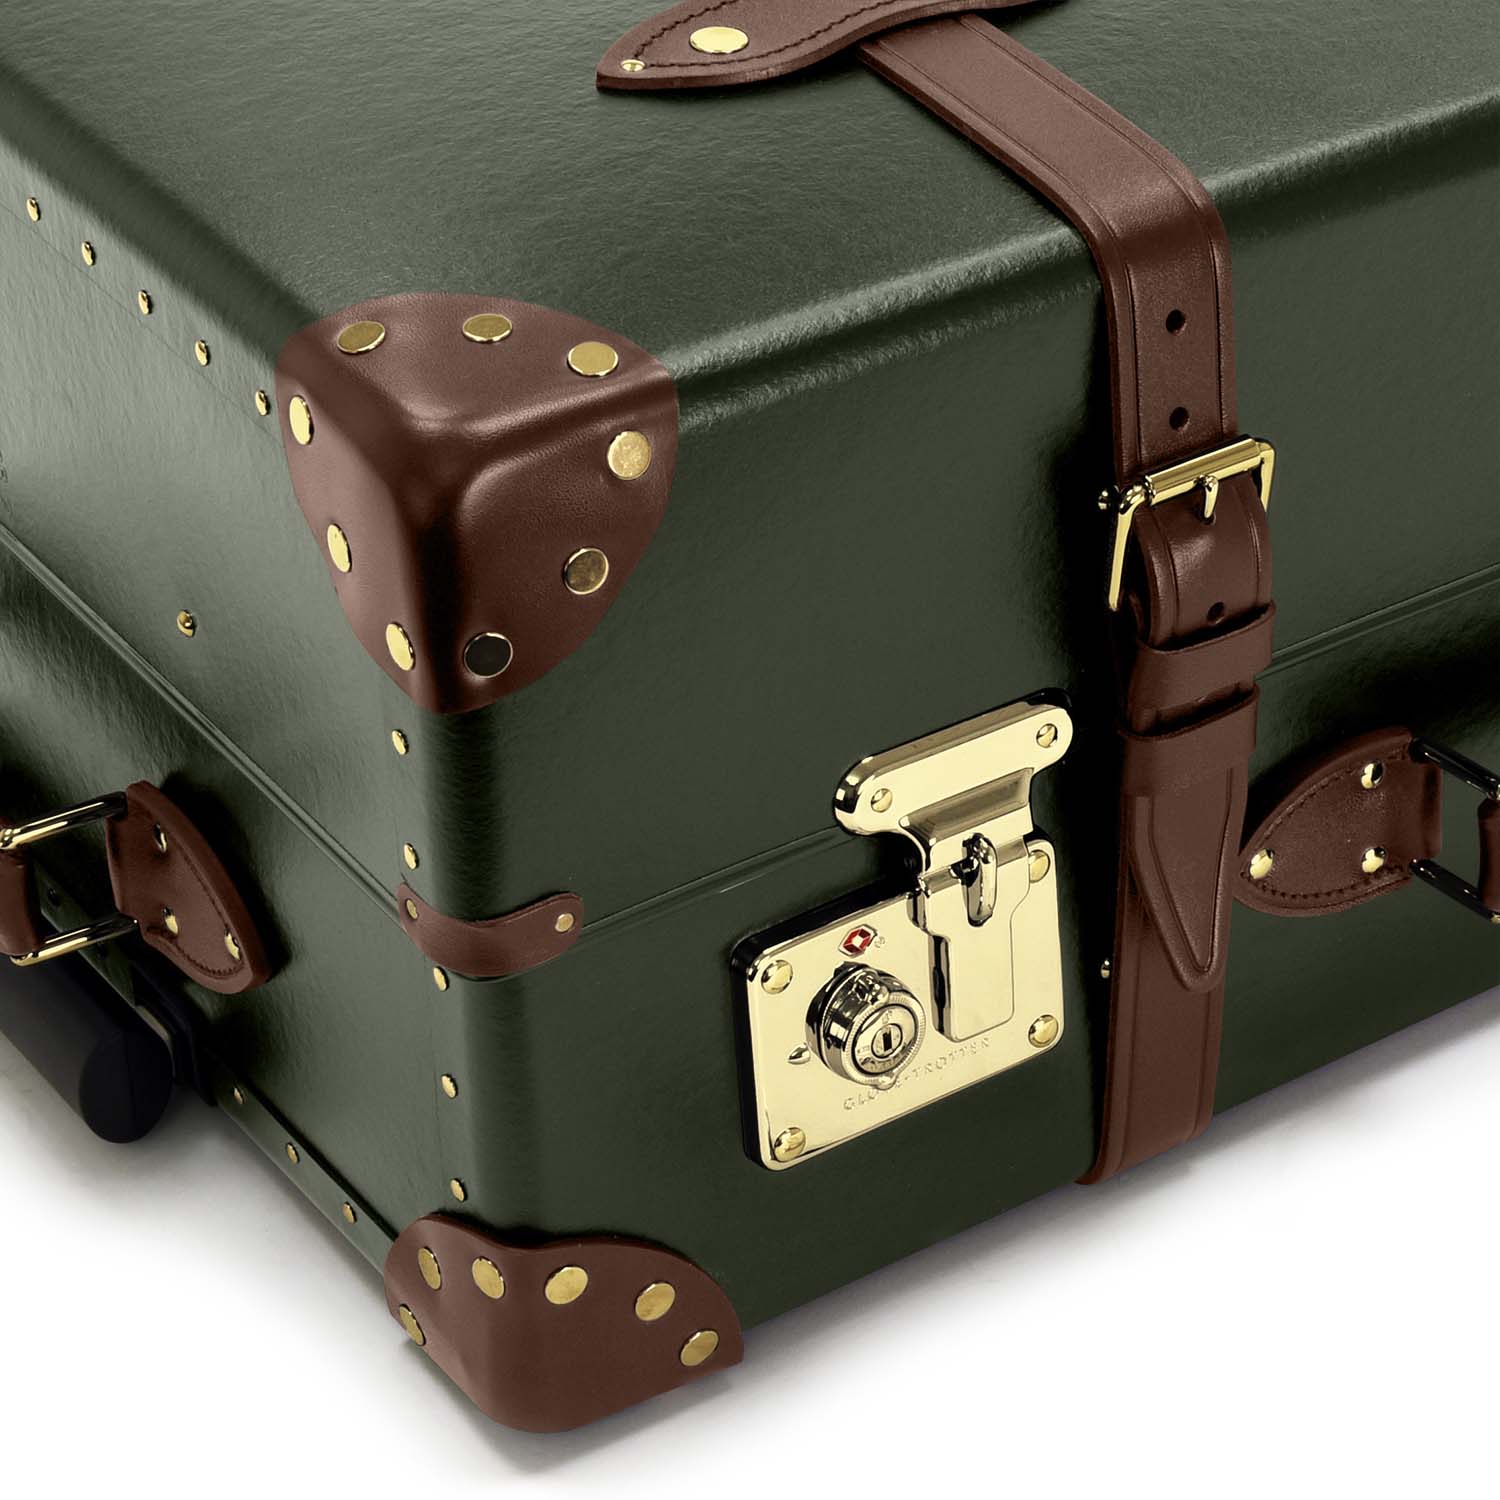 Centenary · Large Check-In - 4 Wheels | Green/Brown - GLOBE-TROTTER